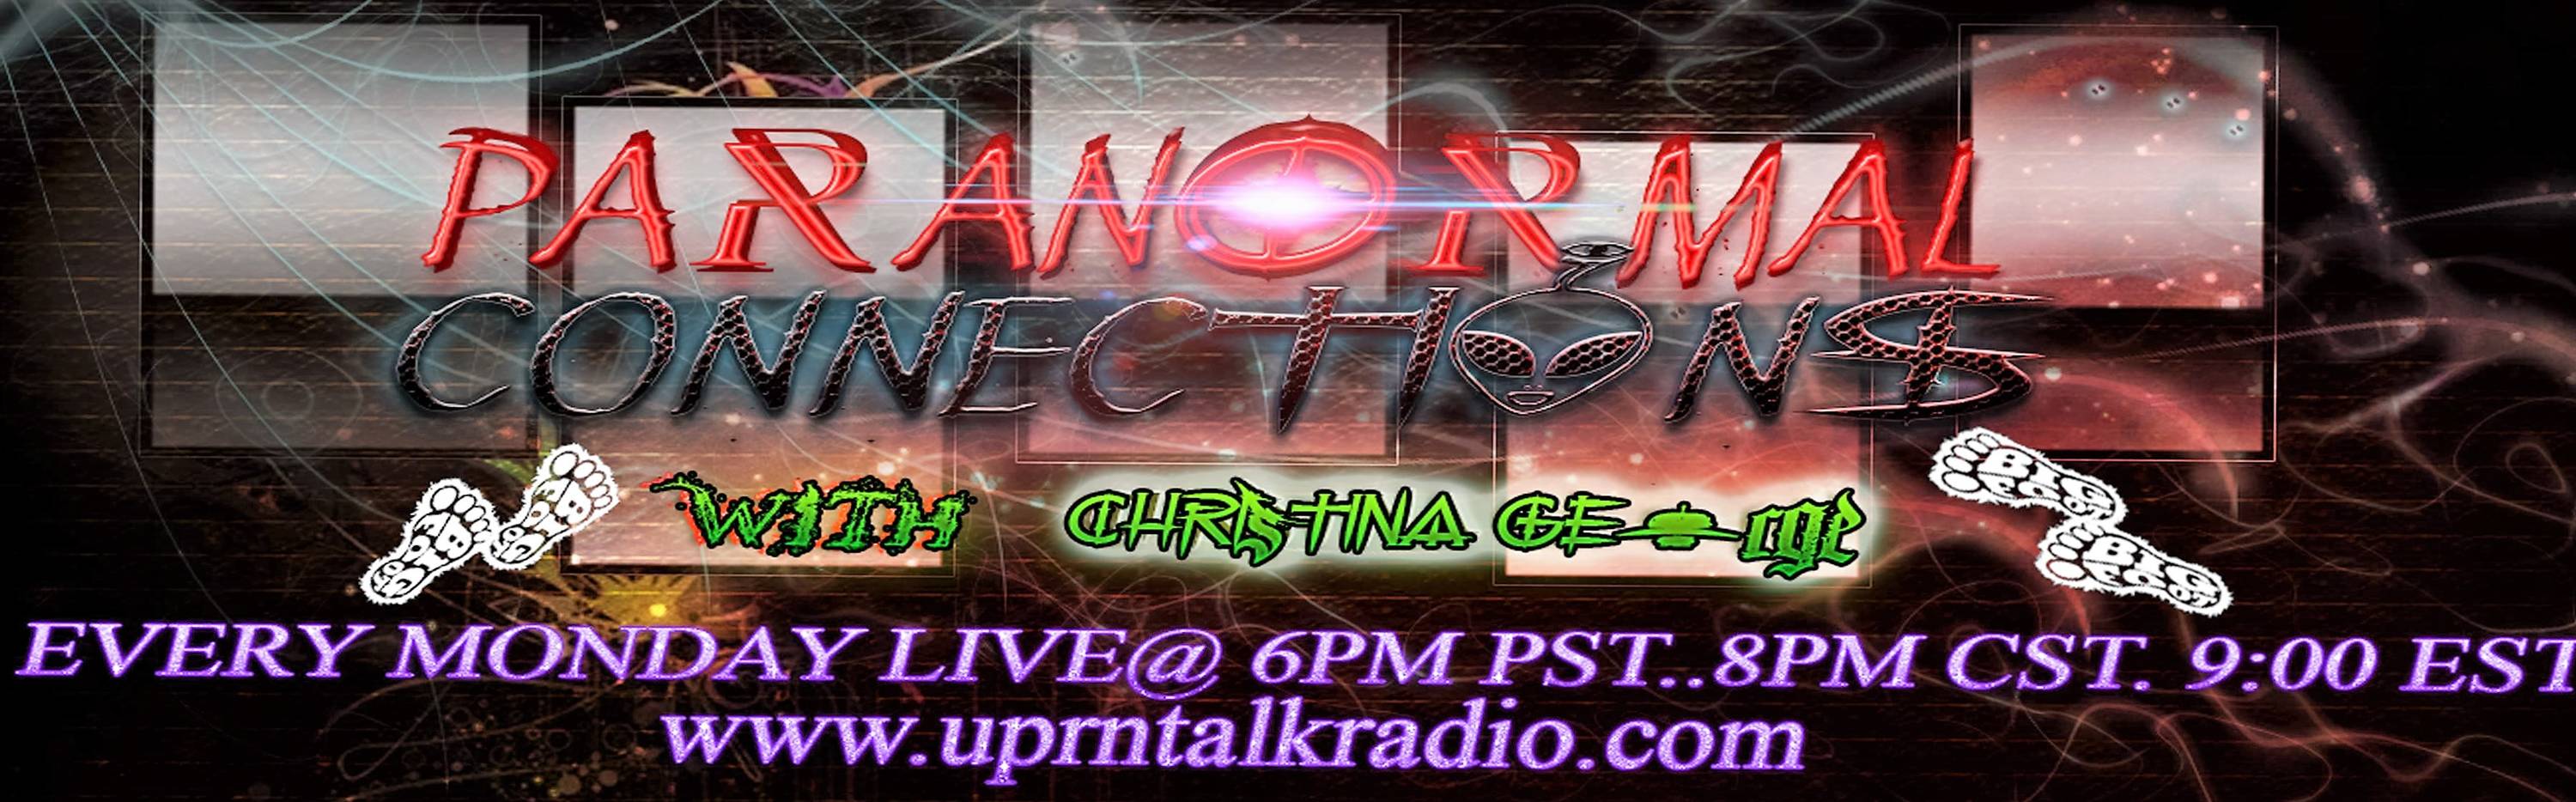 Paranormal Connections Radio Show... TOPIC  West Coast Paranormal Investigators and their upcoming Events 